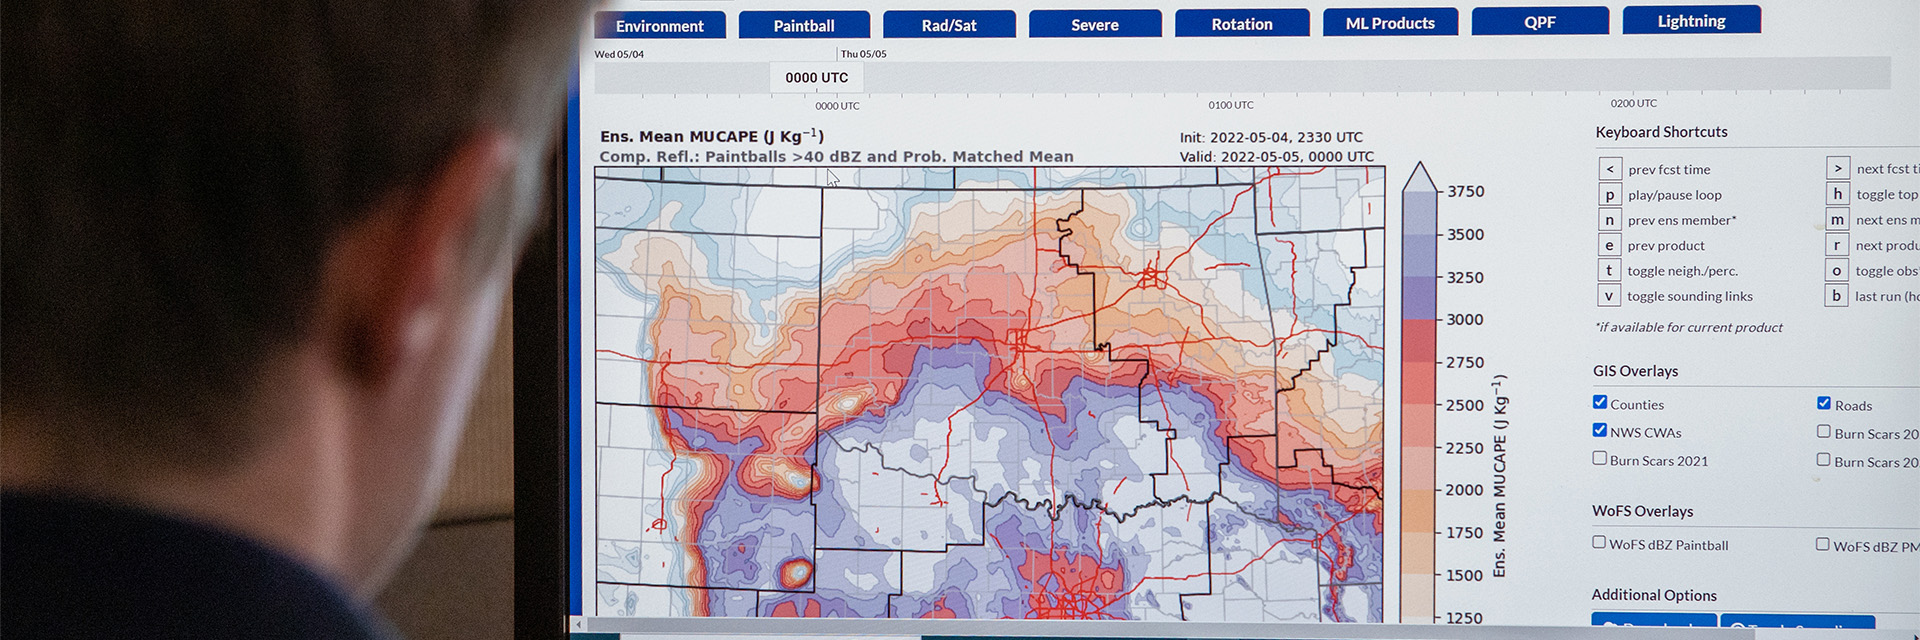 Computer display showing severe weather model data